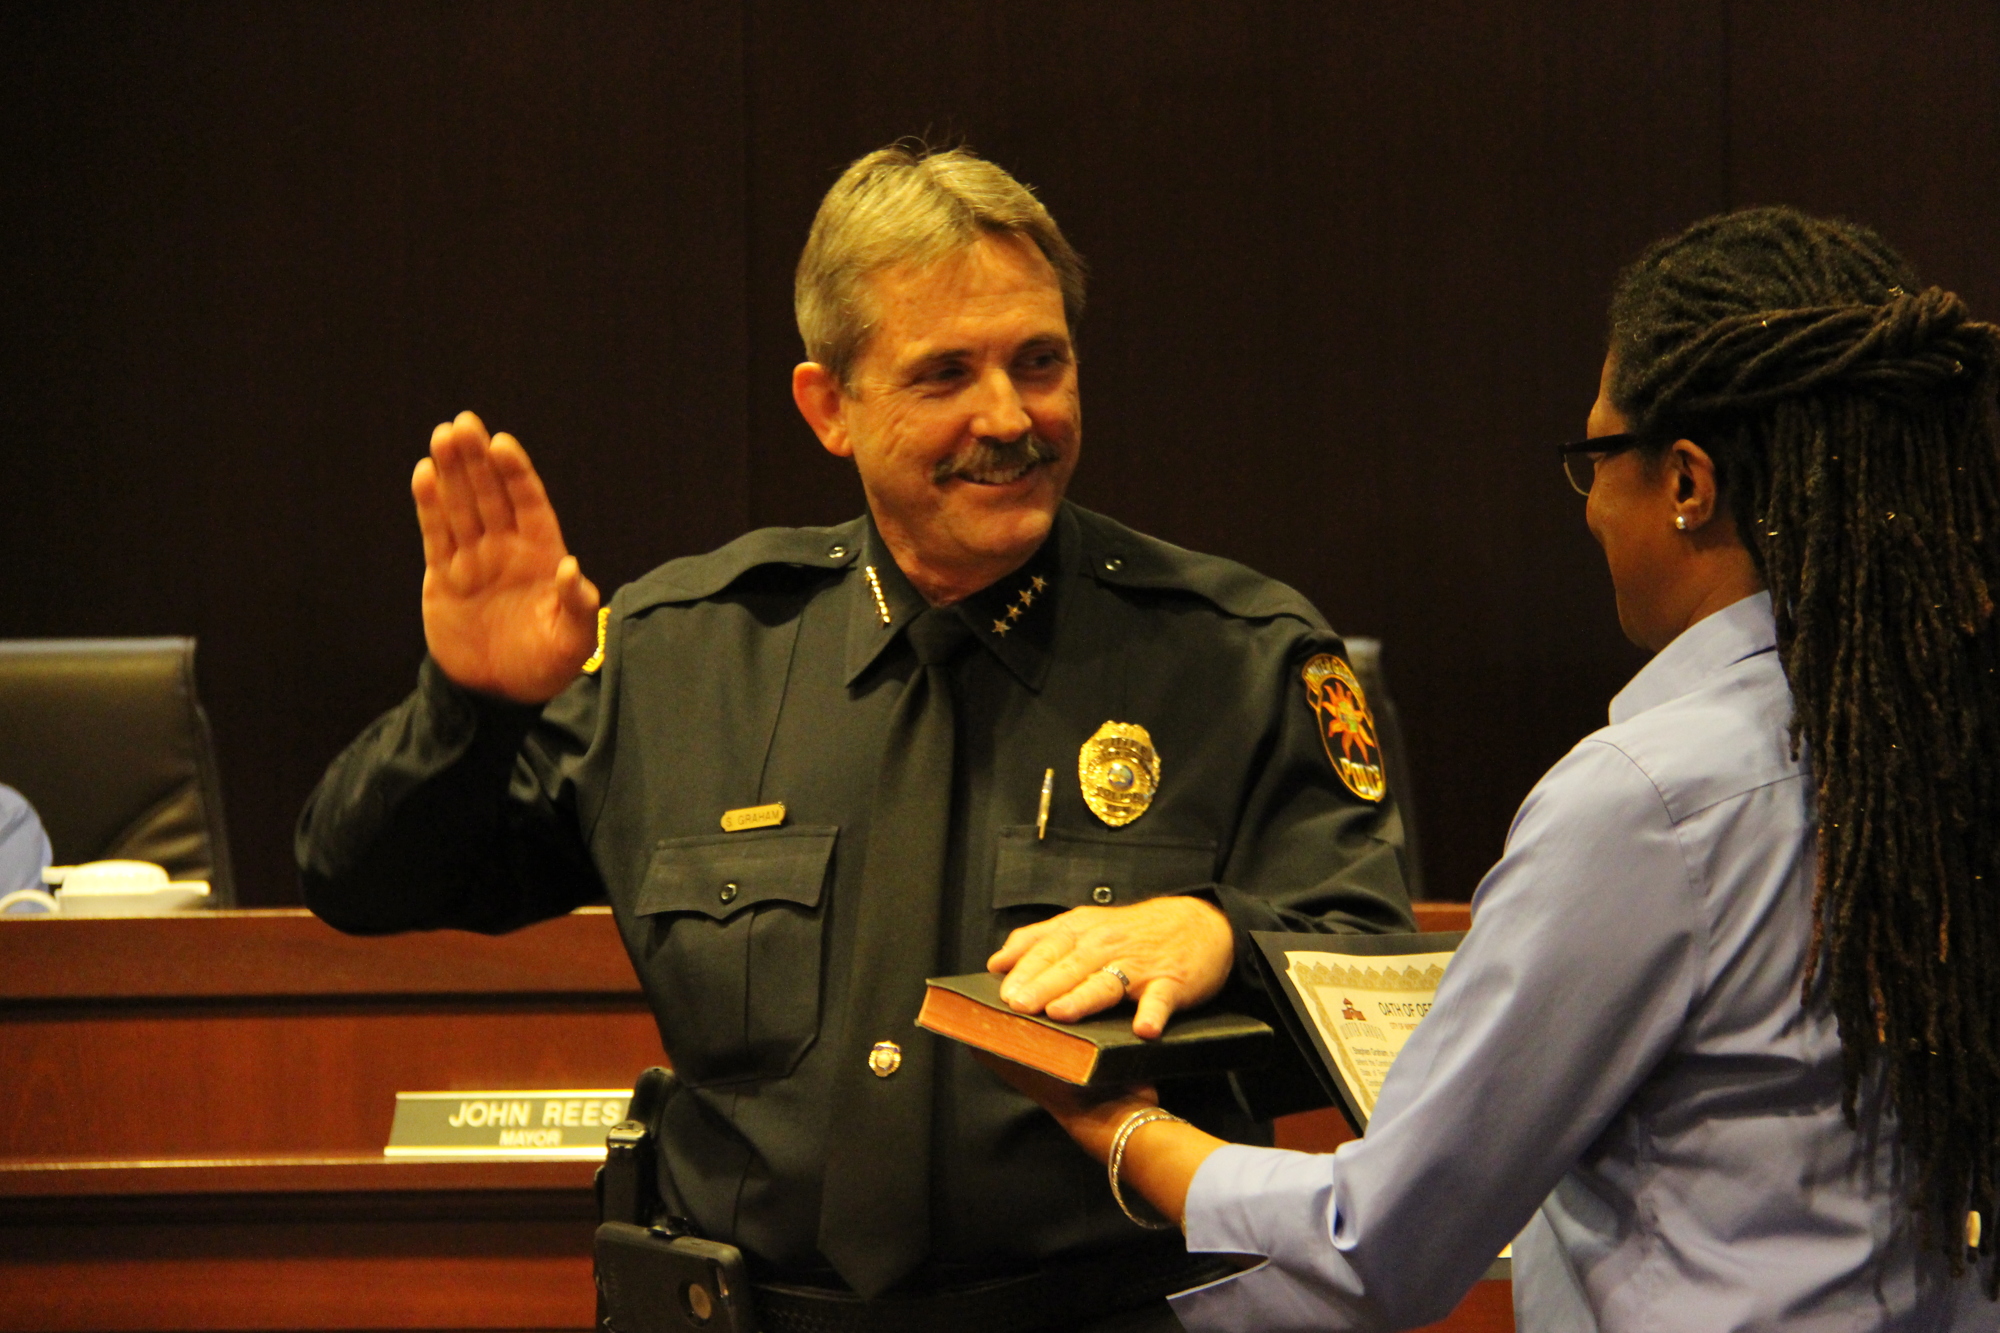  Winter Garden Police Chief Stephen Graham took the oath of office from City Clerk Angee Grimmage.